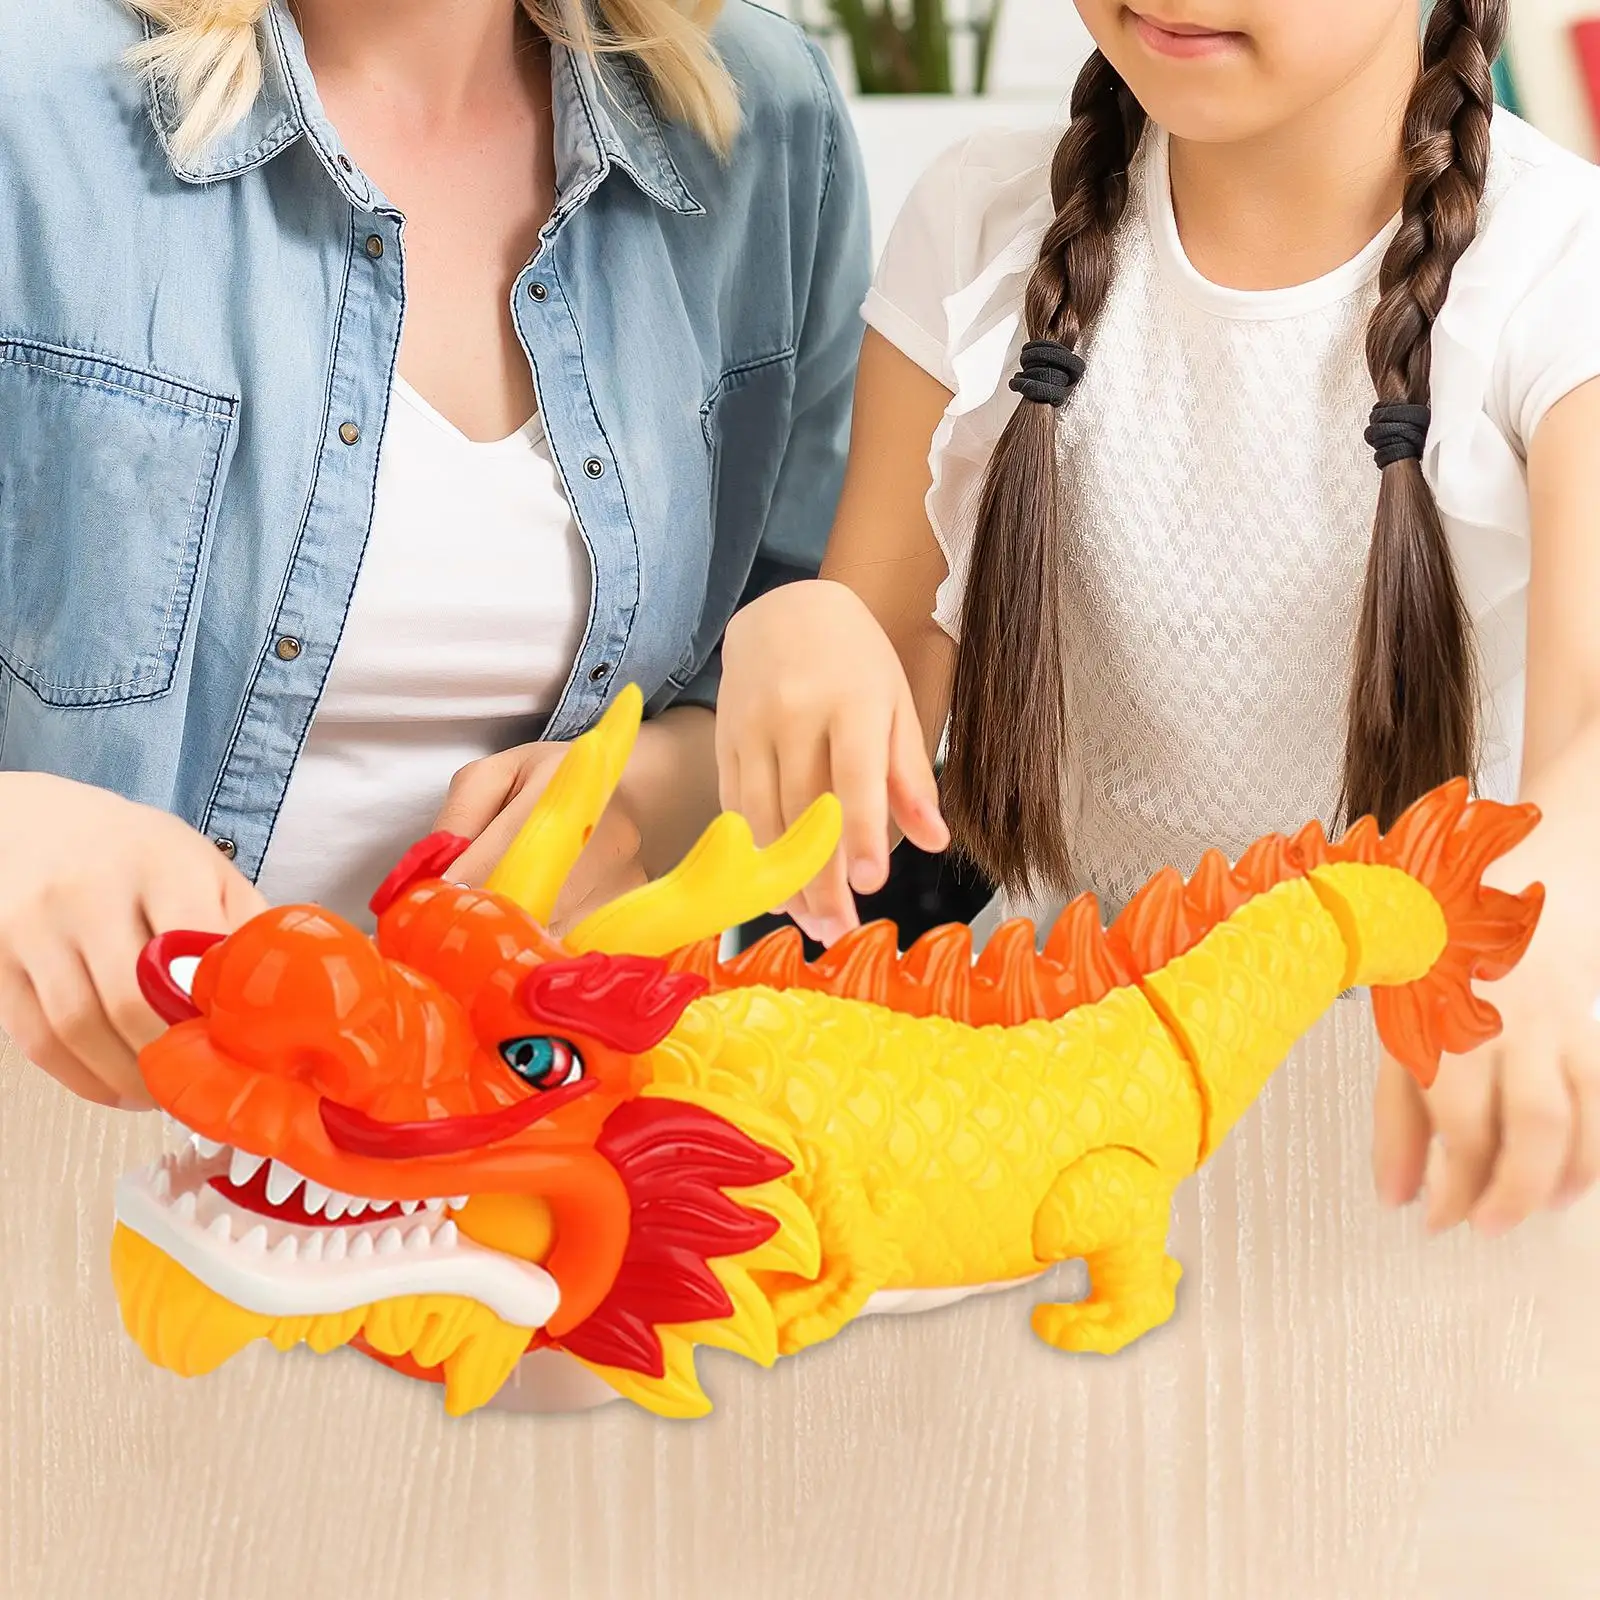 Eletric Dragon Toy Creative Outdoors Walking Educational Learning Infant Toy for Adults 4 5 6 7 8 9 Year Olds Children Kid Boys